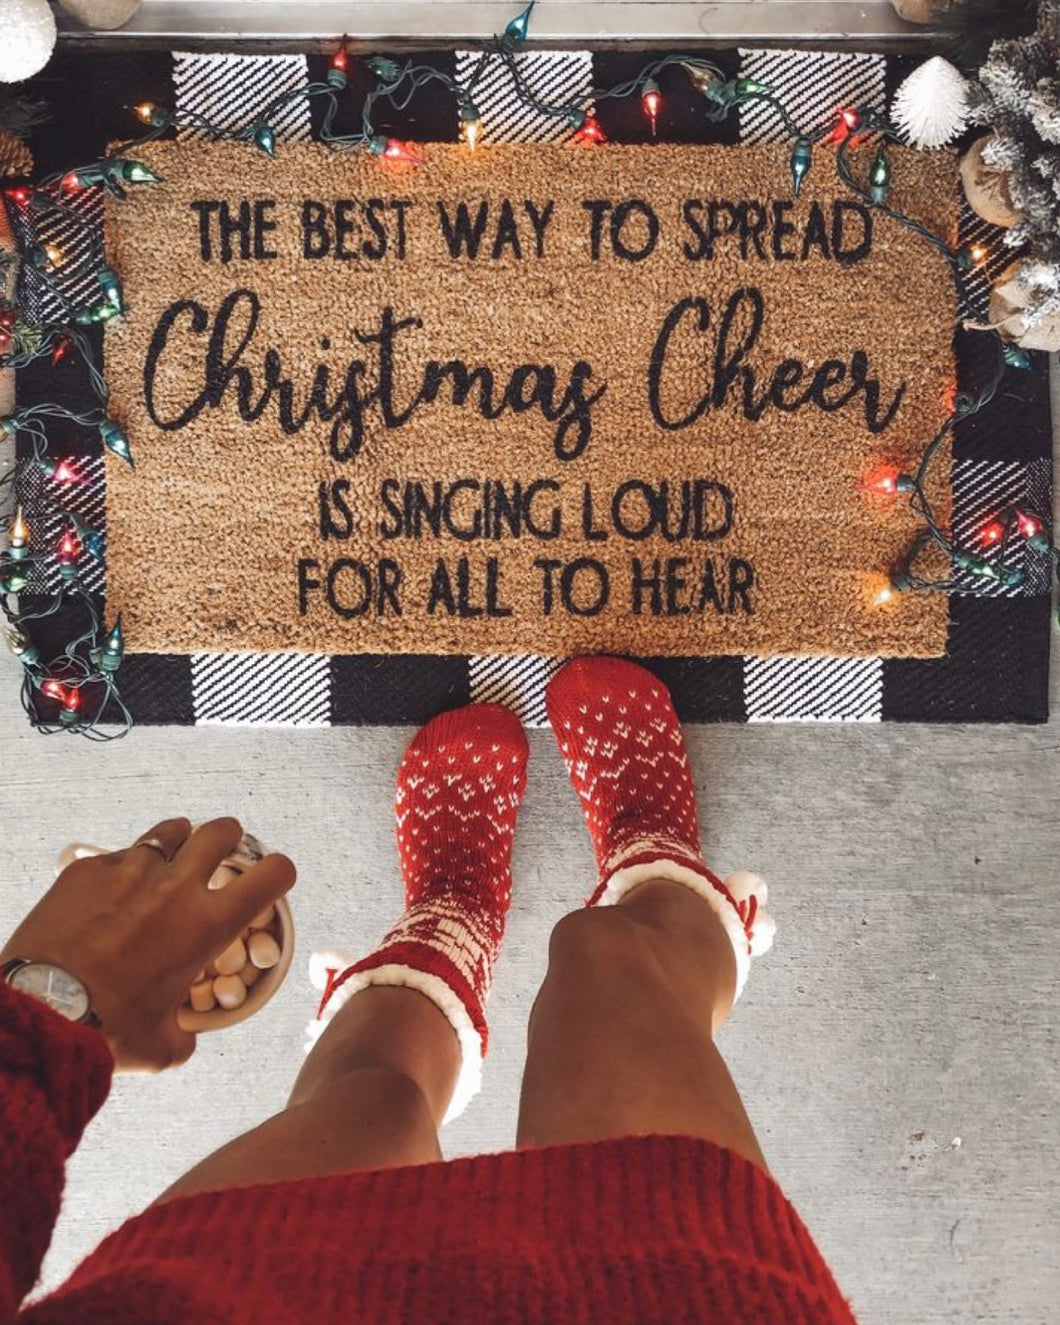 The best way to spread Christmas Cheer doormat DIY at home kit